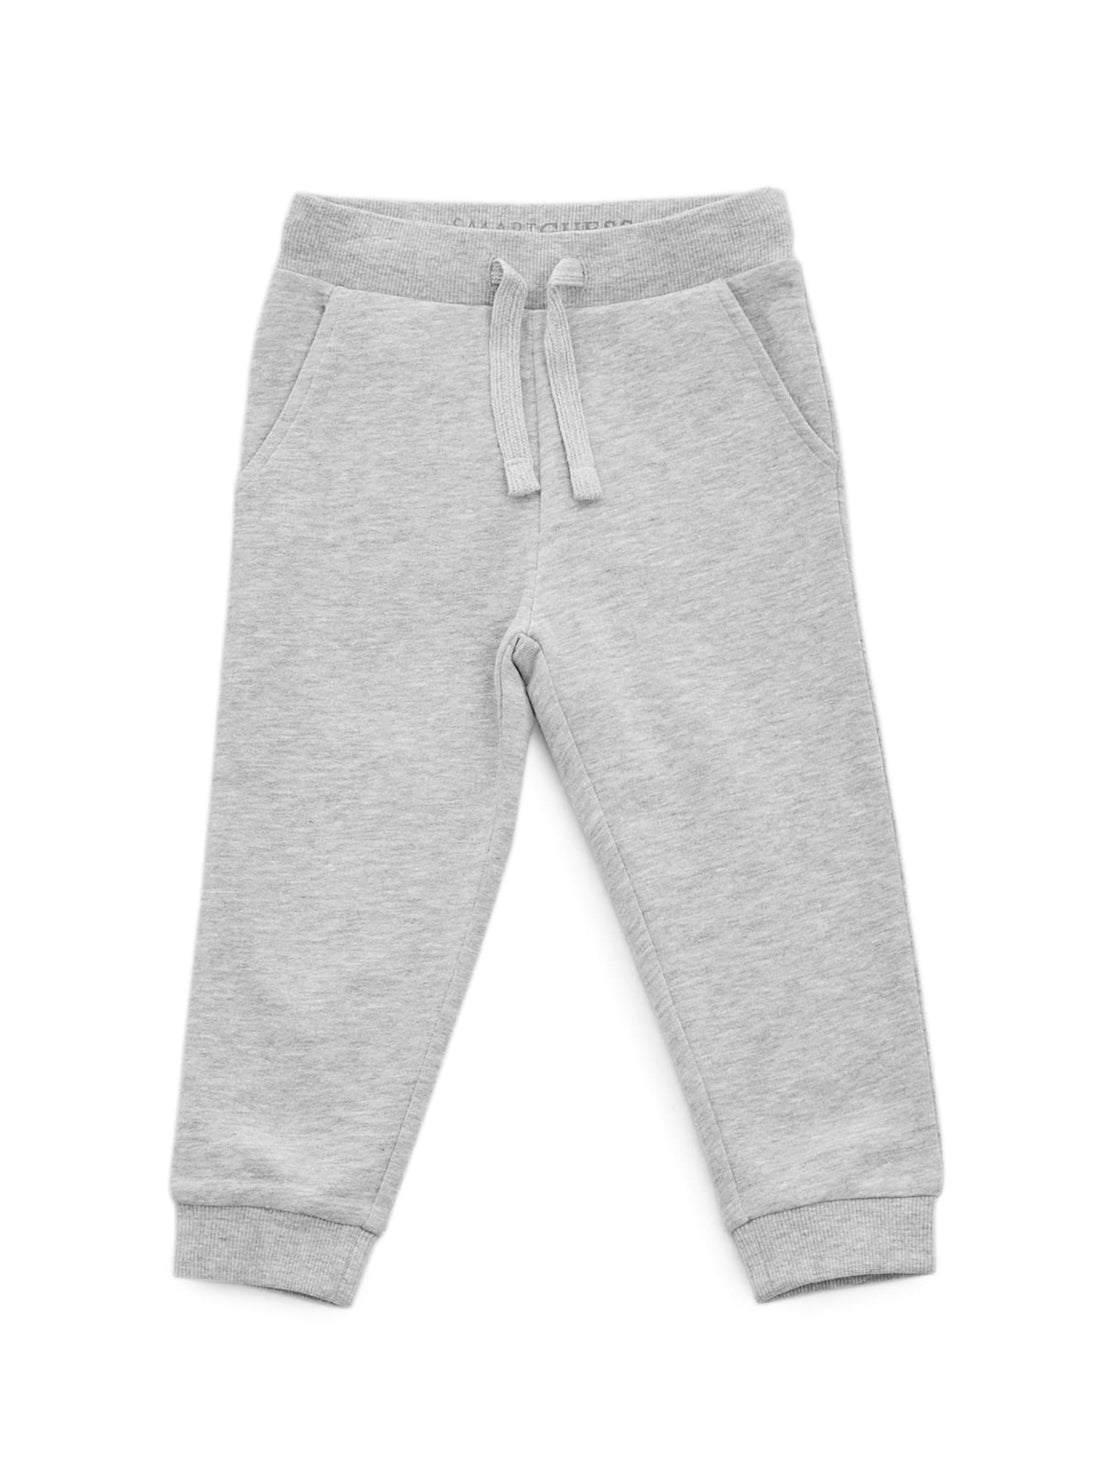 GUESS Little Boys Grey Active Pants (2-7) N93Q17KAUG0 Front View